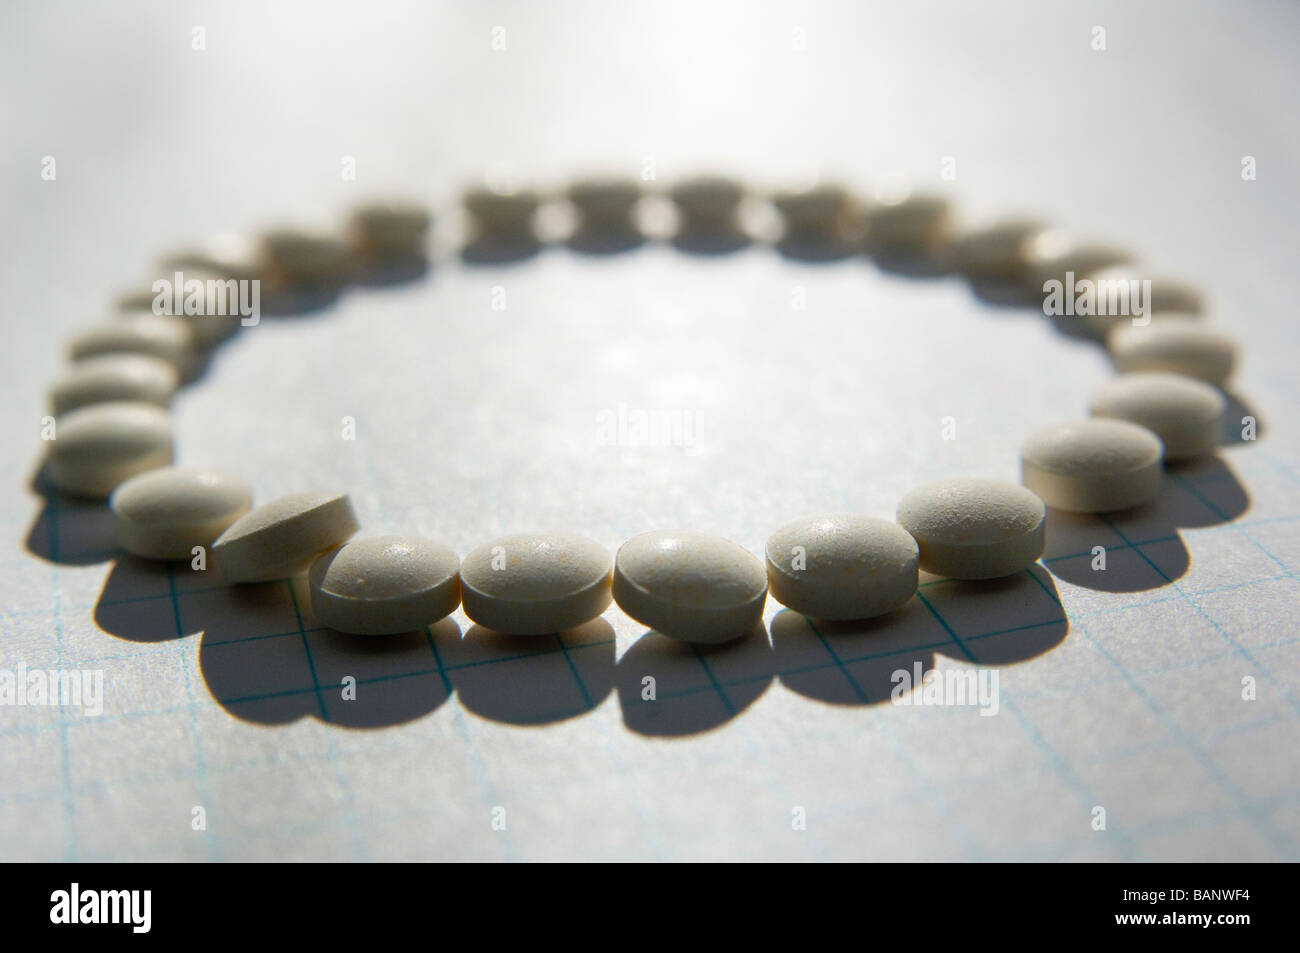 Pills on graph paper aligned to form a circle with one pill leaning on others. Stock Photo